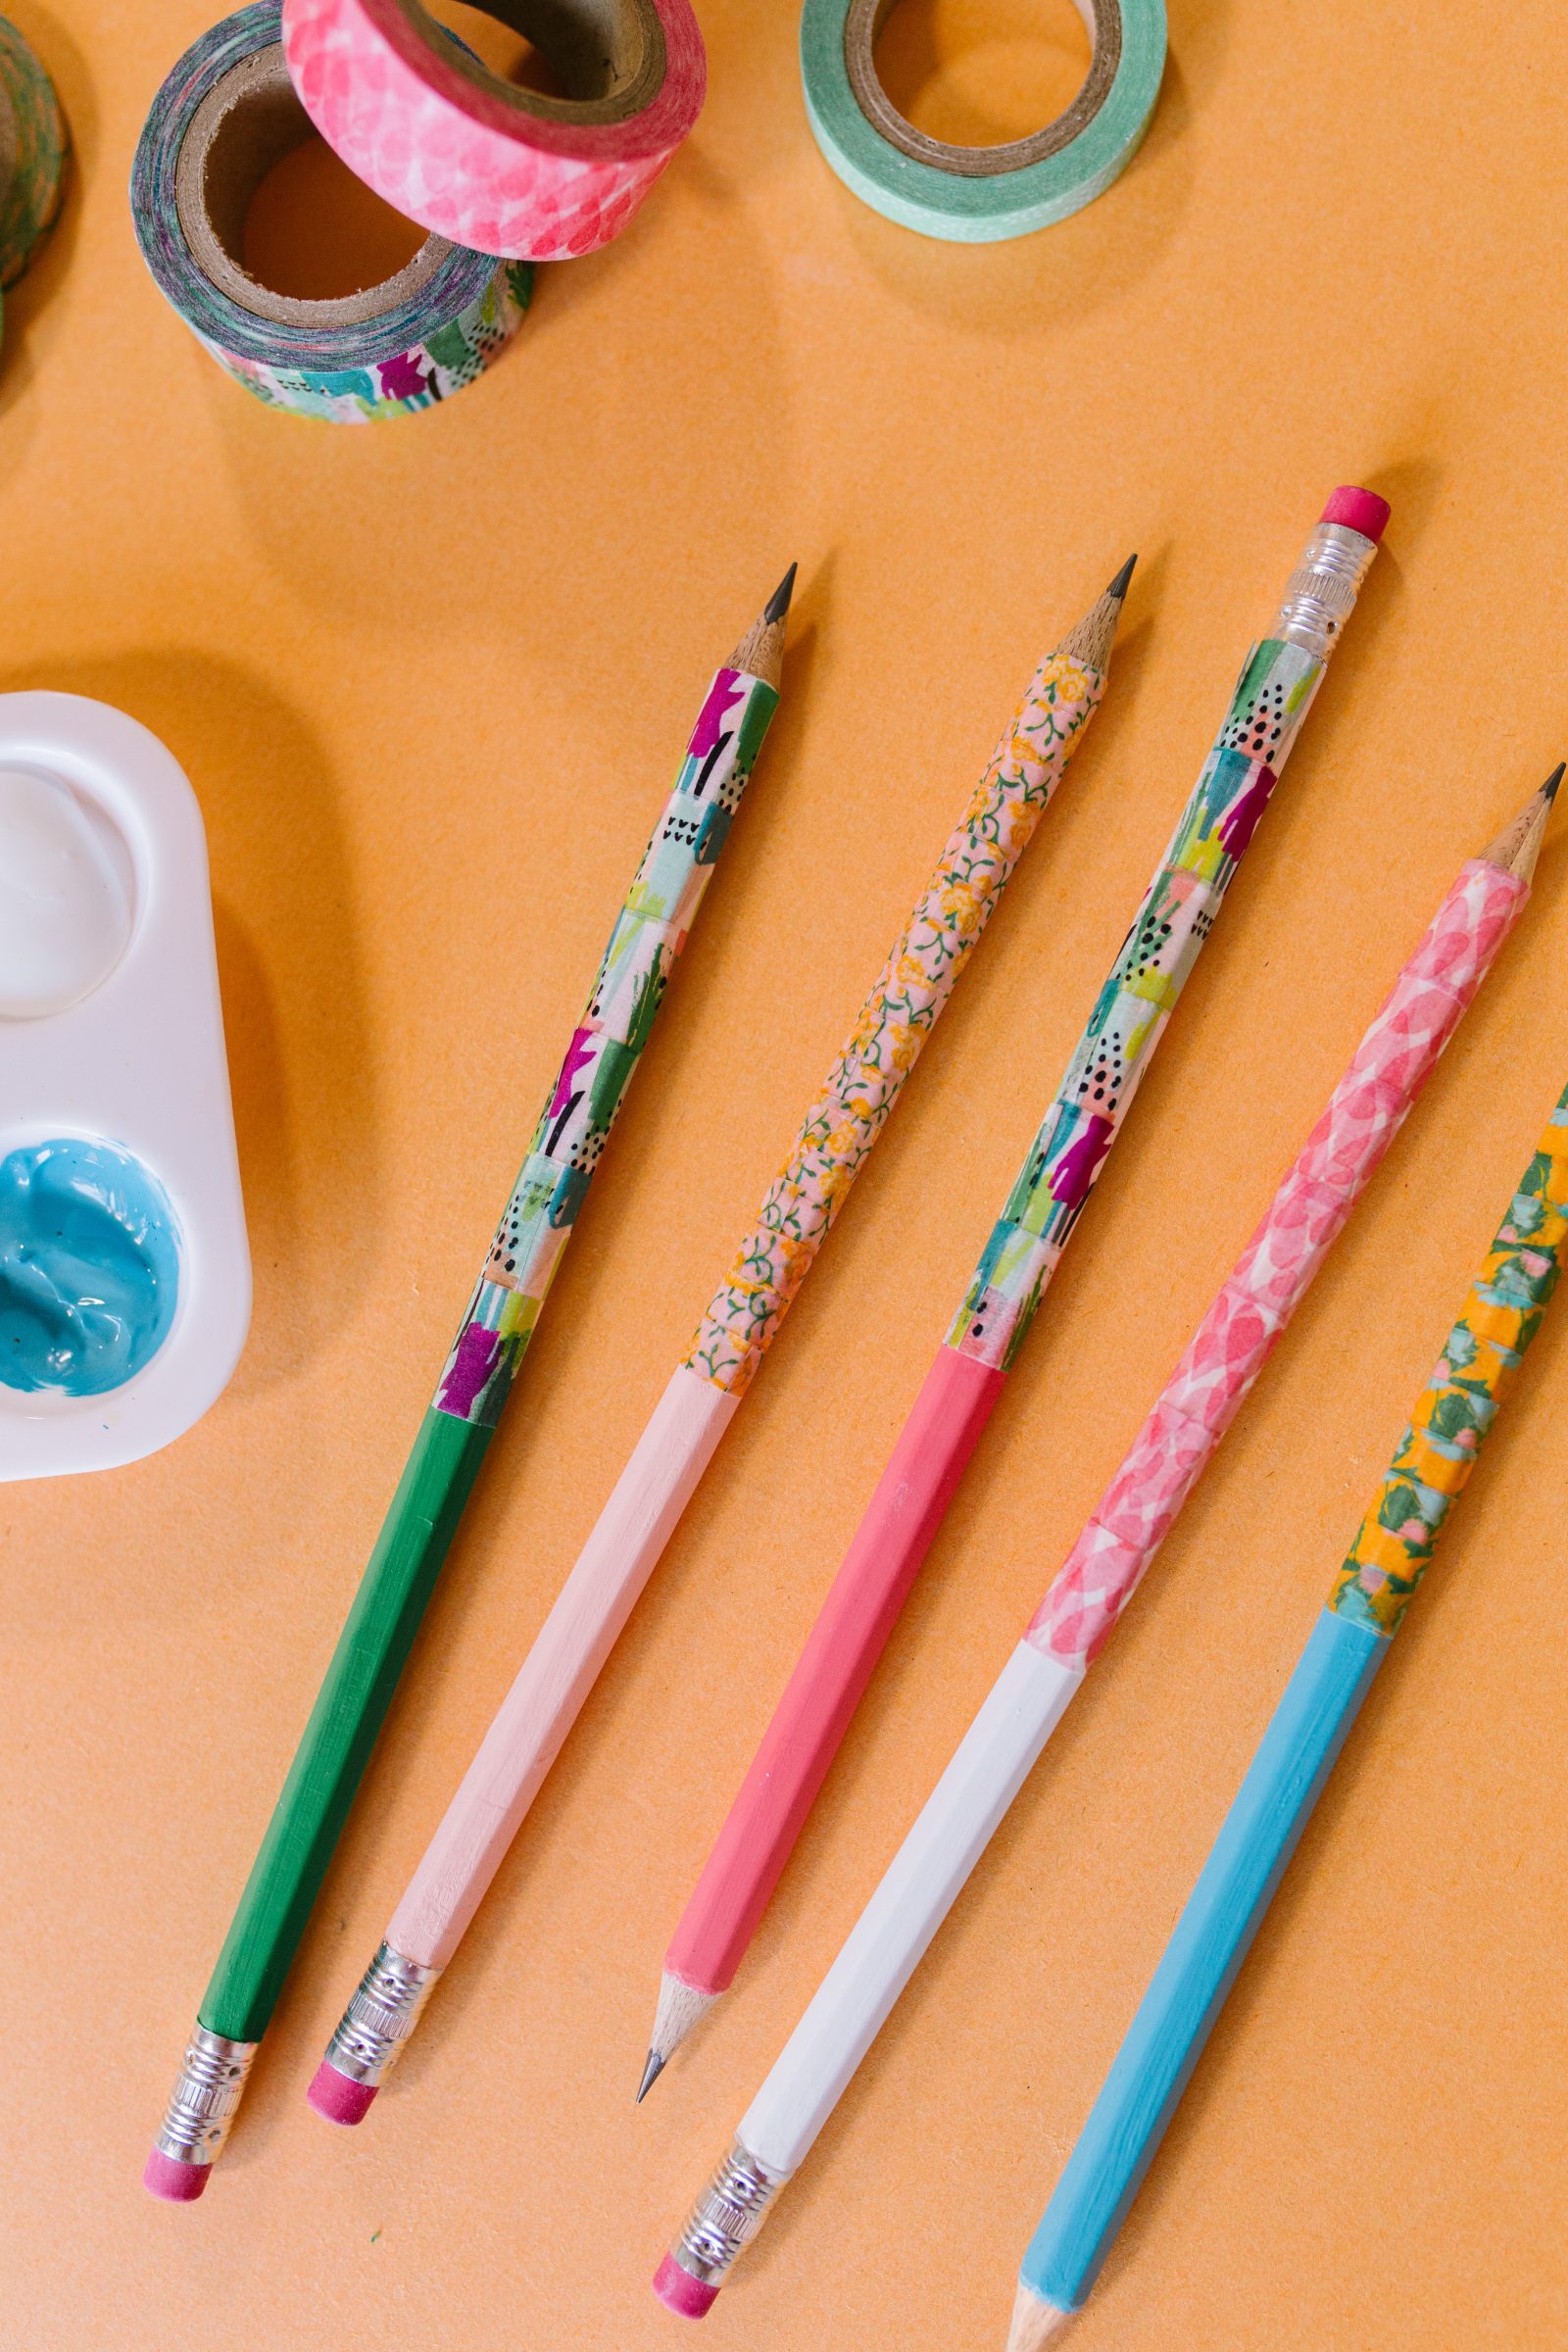 Back to School Crafts: How to Make Embellished Pencils 3 Ways + a tutorial featured by Top US Craft Blog + The Pretty Life Girls + DIY Marbled Pencils